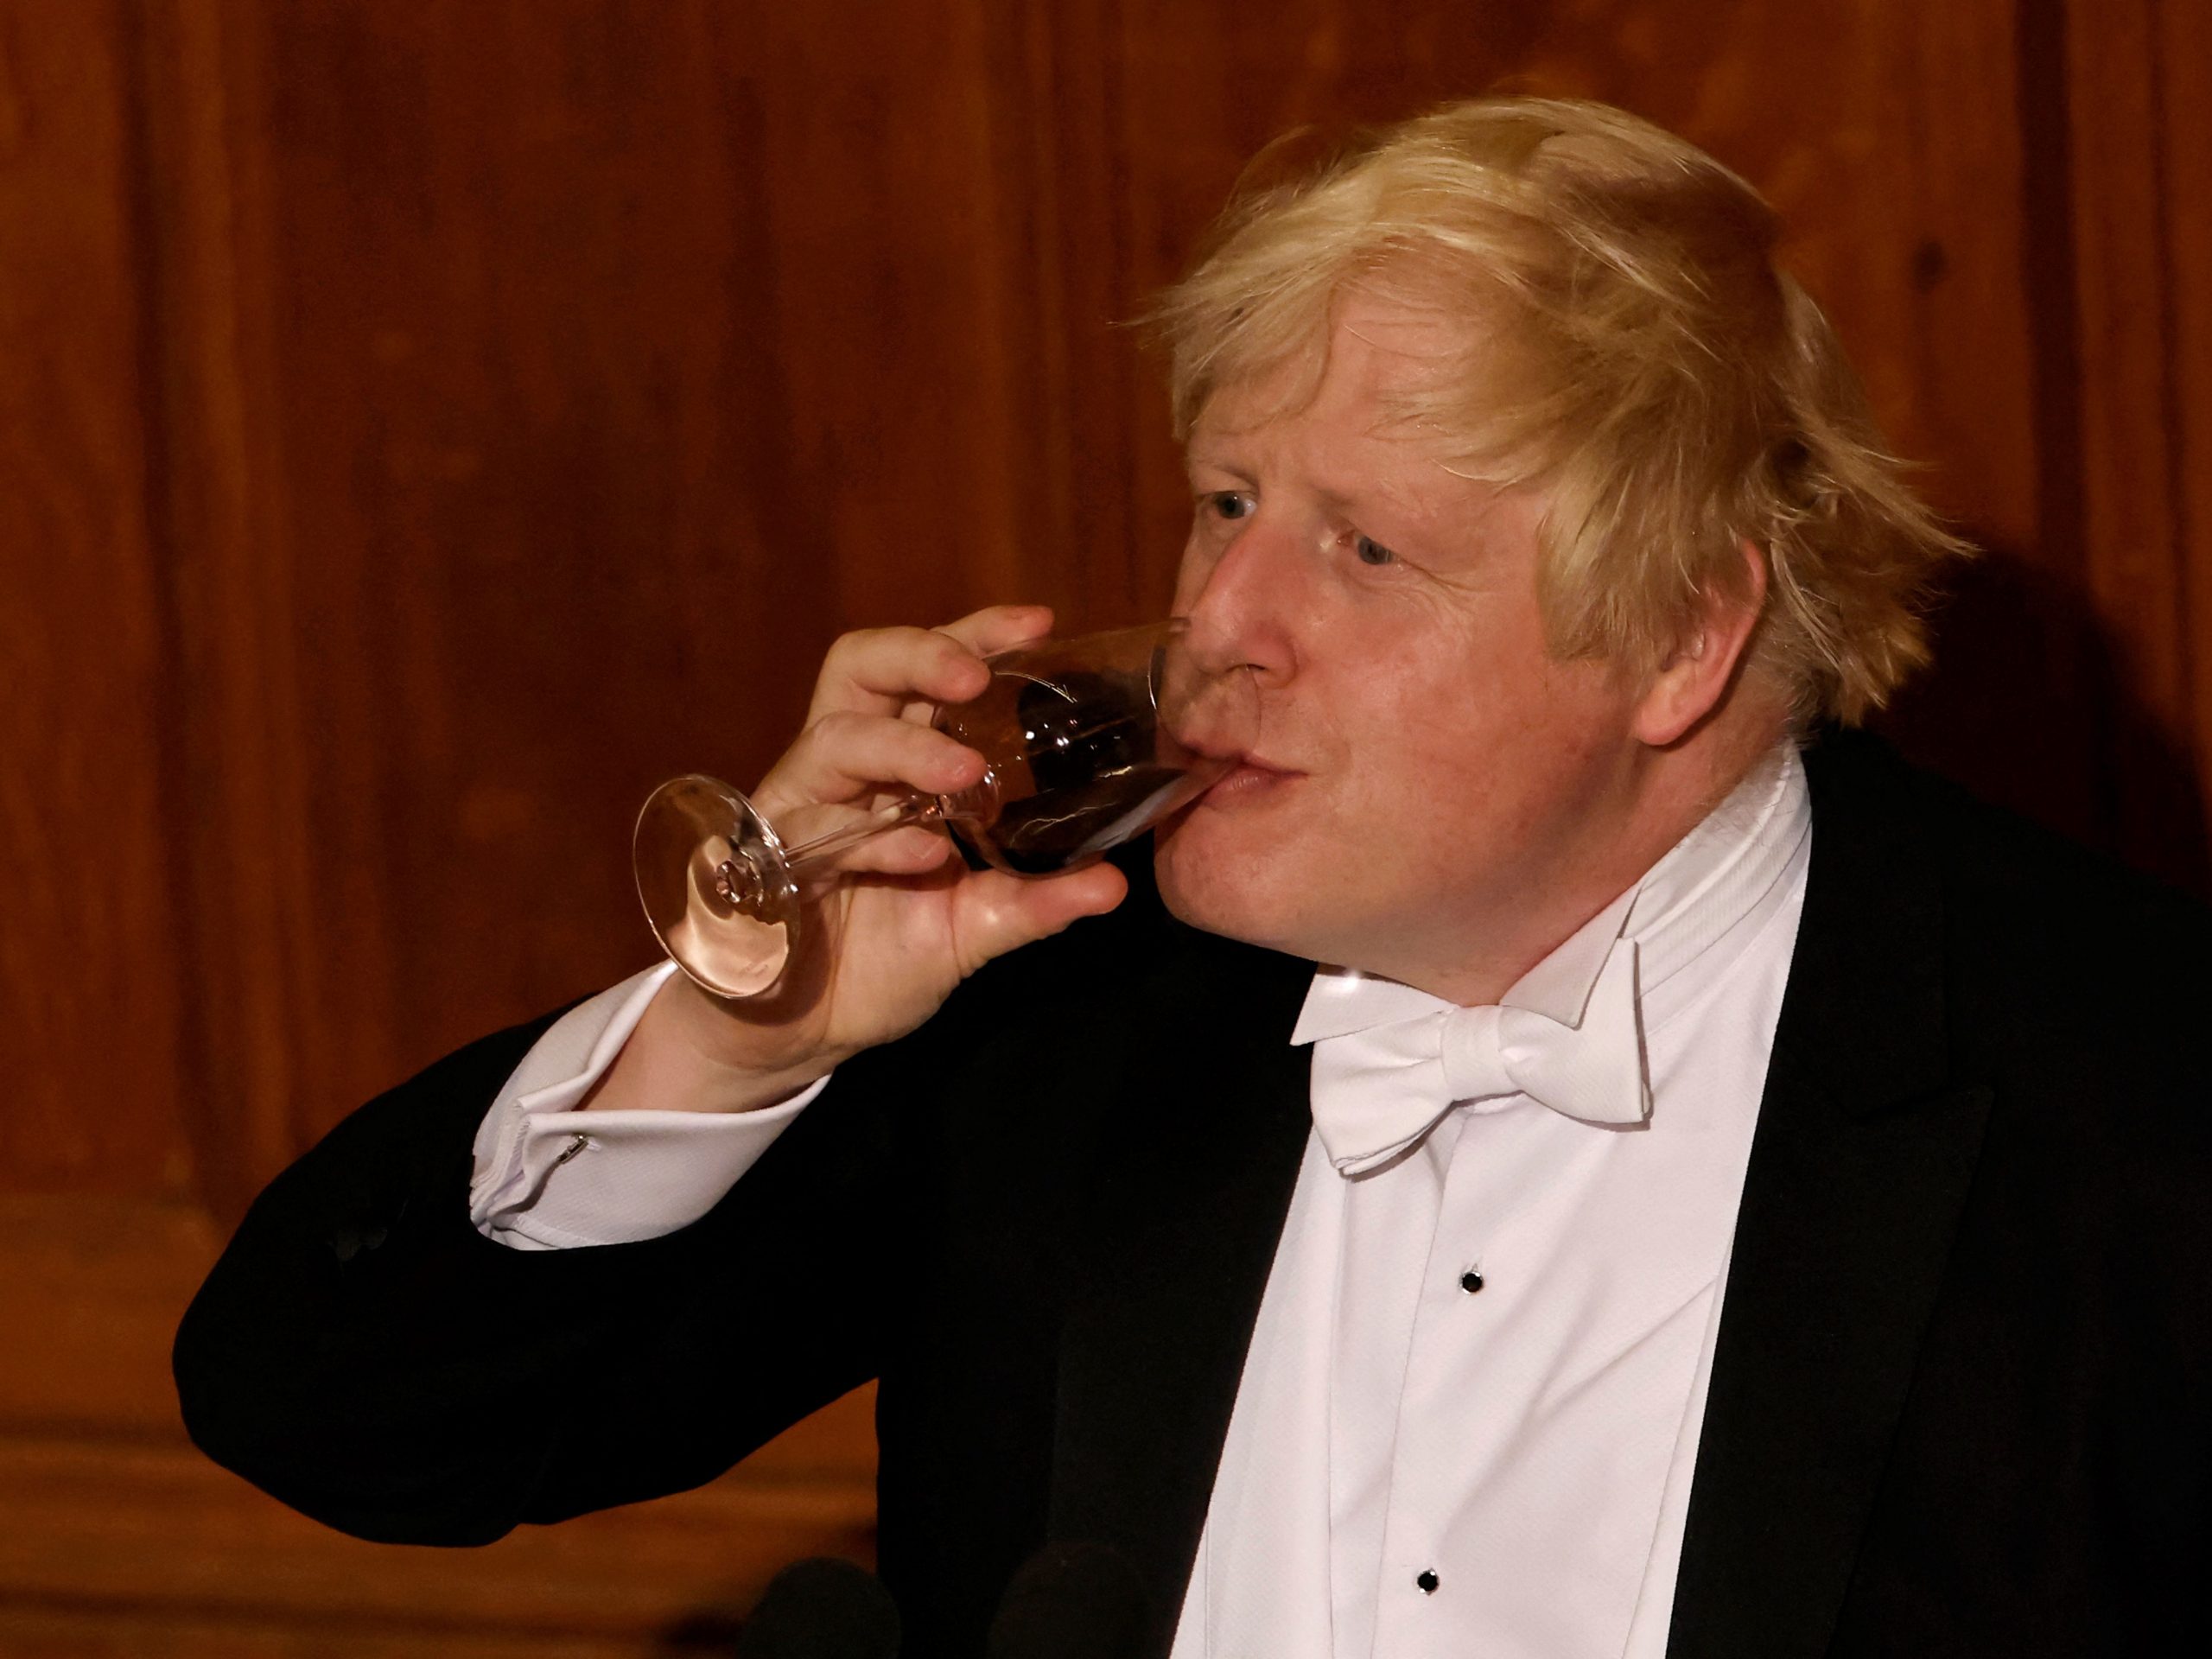 Boris Johnson drinks red wine from a glass